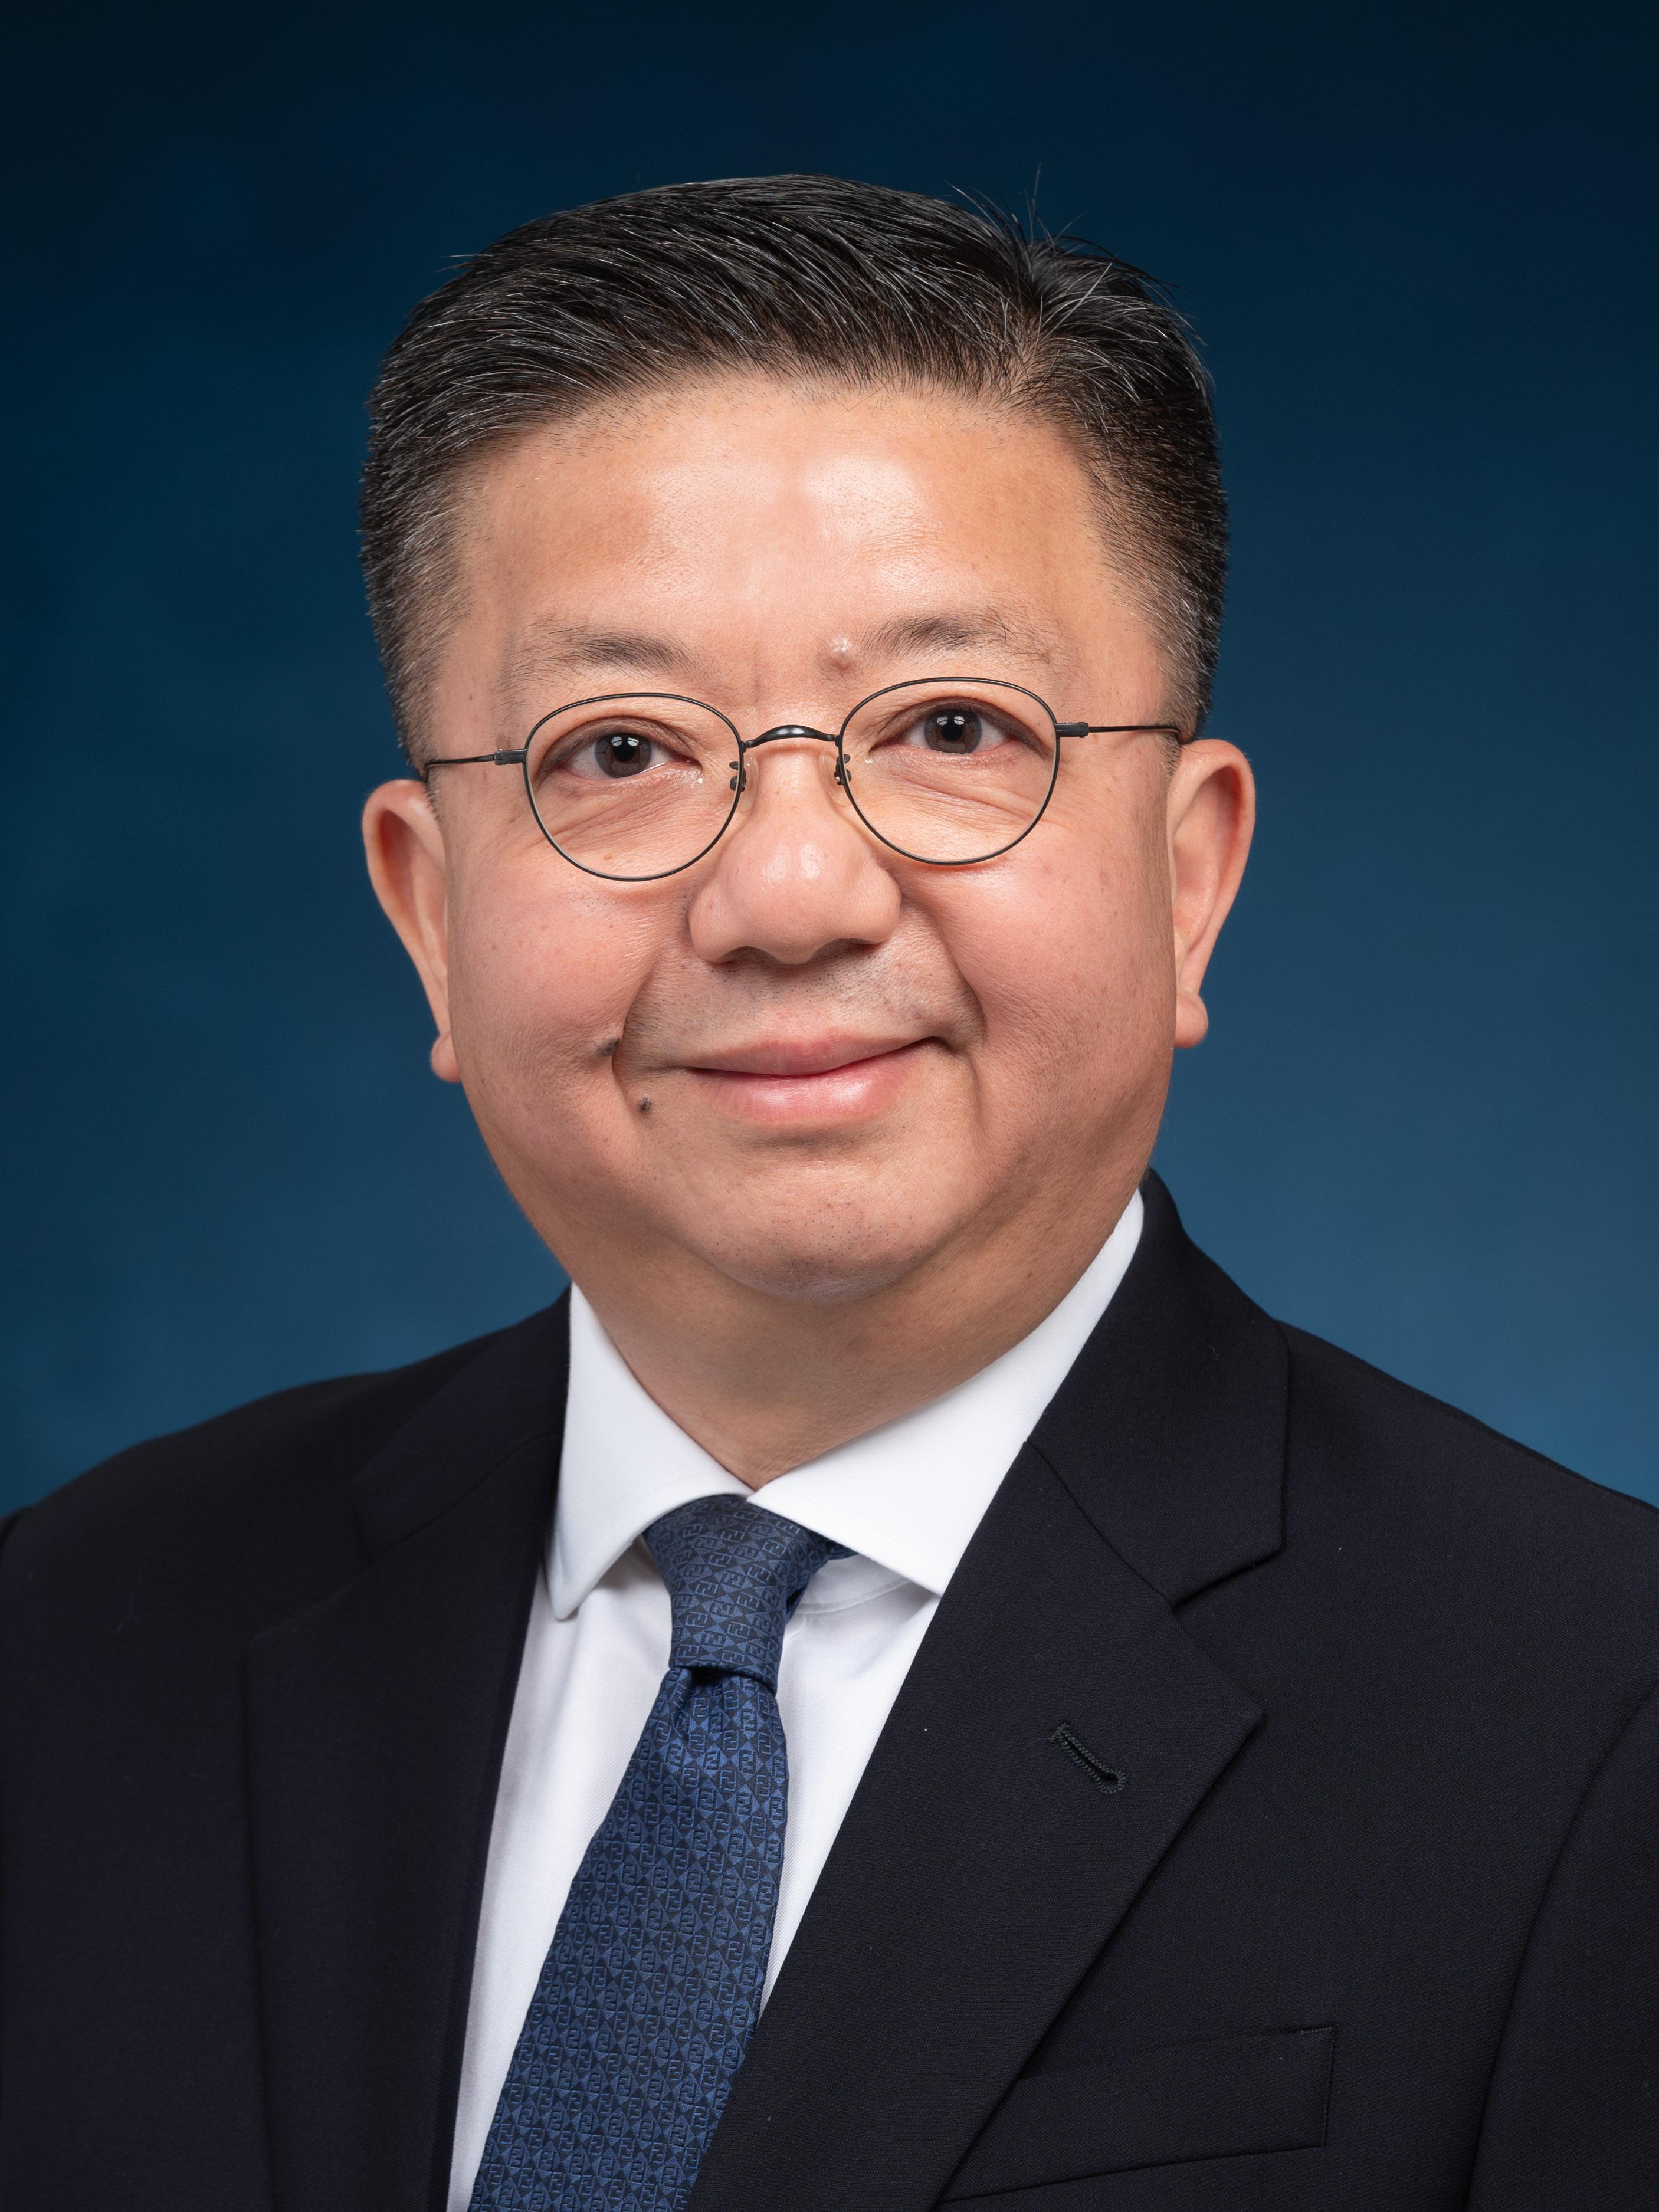 A Government spokesman said today (October 25) that the physical office of Hong Kong Talent Engage (HKTE) would formally be established on October 30 and render full support to the Government's endeavours to trawl for and retain talents. The Director of HKTE is Mr Anthony Lau Chun-hon. Establishing HKTE is one of the new initiatives announced by the Chief Executive in his Policy Address today.